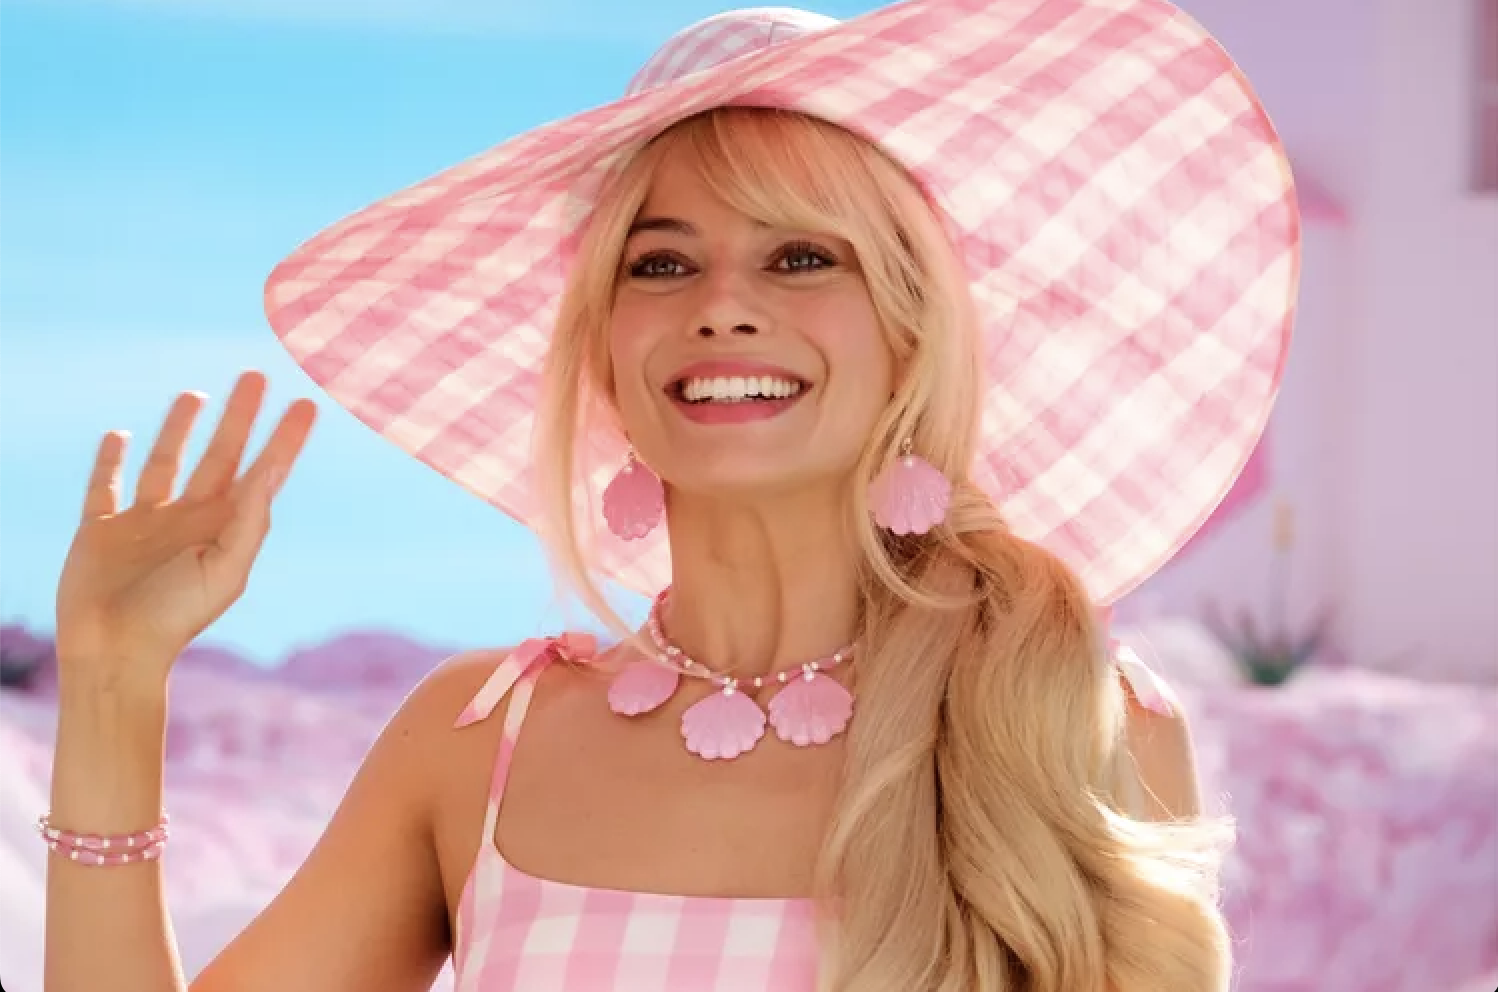 ‘Barbie’ Reaches $1 Billion at Worldwide Box Office 2 Weeks After Release